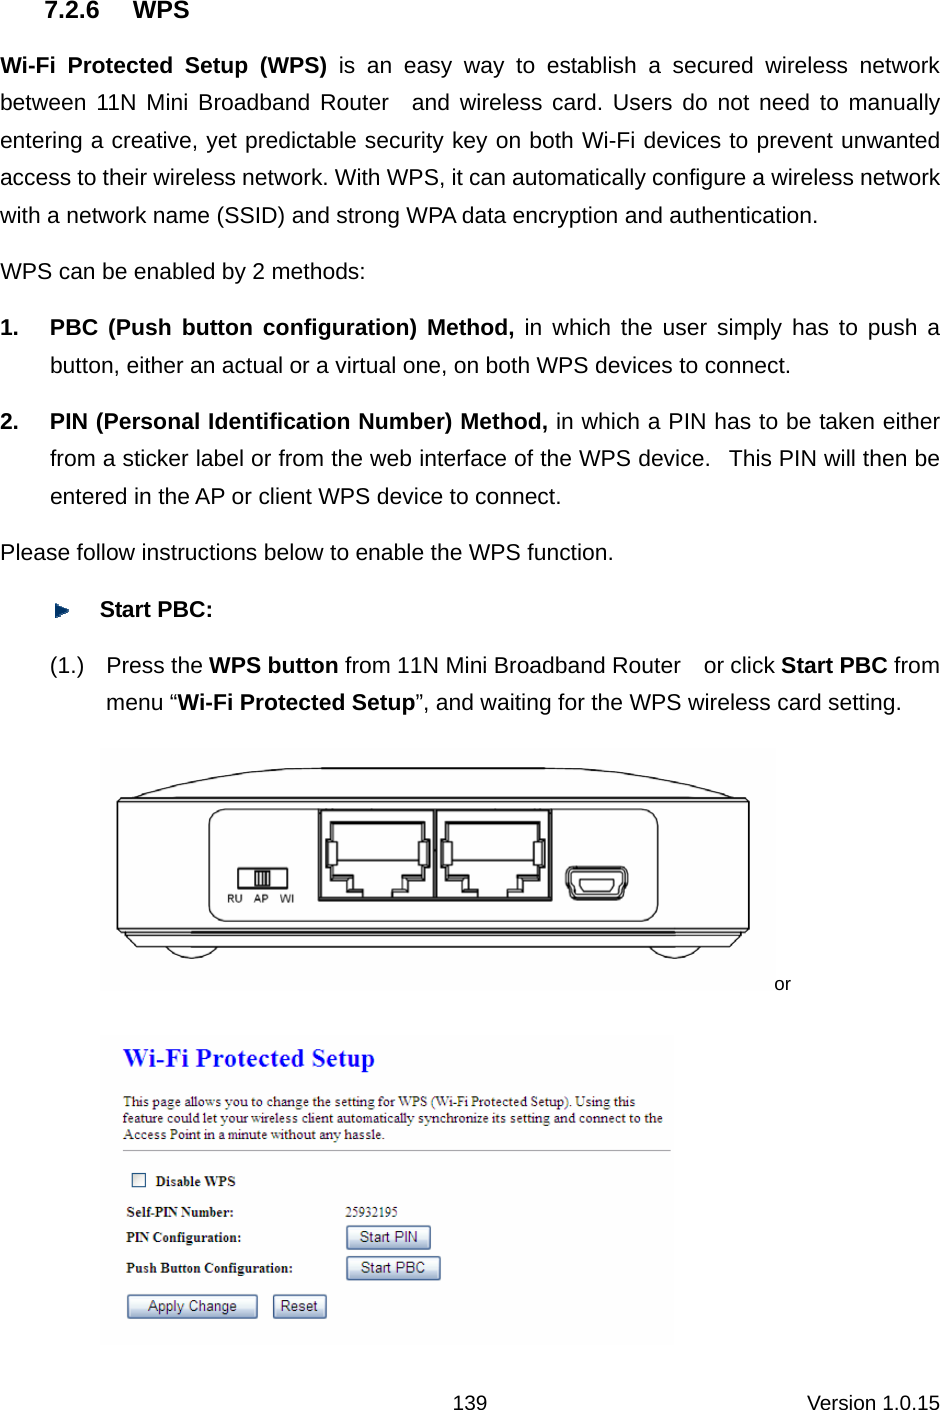 Version 1.0.15 139 7.2.6 WPS Wi-Fi Protected Setup (WPS) is an easy way to establish a secured wireless network between 11N Mini Broadband Router  and wireless card. Users do not need to manually entering a creative, yet predictable security key on both Wi-Fi devices to prevent unwanted access to their wireless network. With WPS, it can automatically configure a wireless network with a network name (SSID) and strong WPA data encryption and authentication.   WPS can be enabled by 2 methods:   1.  PBC (Push button configuration) Method, in which the user simply has to push a button, either an actual or a virtual one, on both WPS devices to connect.   2.  PIN (Personal Identification Number) Method, in which a PIN has to be taken either from a sticker label or from the web interface of the WPS device.   This PIN will then be entered in the AP or client WPS device to connect.   Please follow instructions below to enable the WPS function.    Start PBC: (1.) Press the WPS button from 11N Mini Broadband Router    or click Start PBC from menu “Wi-Fi Protected Setup”, and waiting for the WPS wireless card setting.   or  